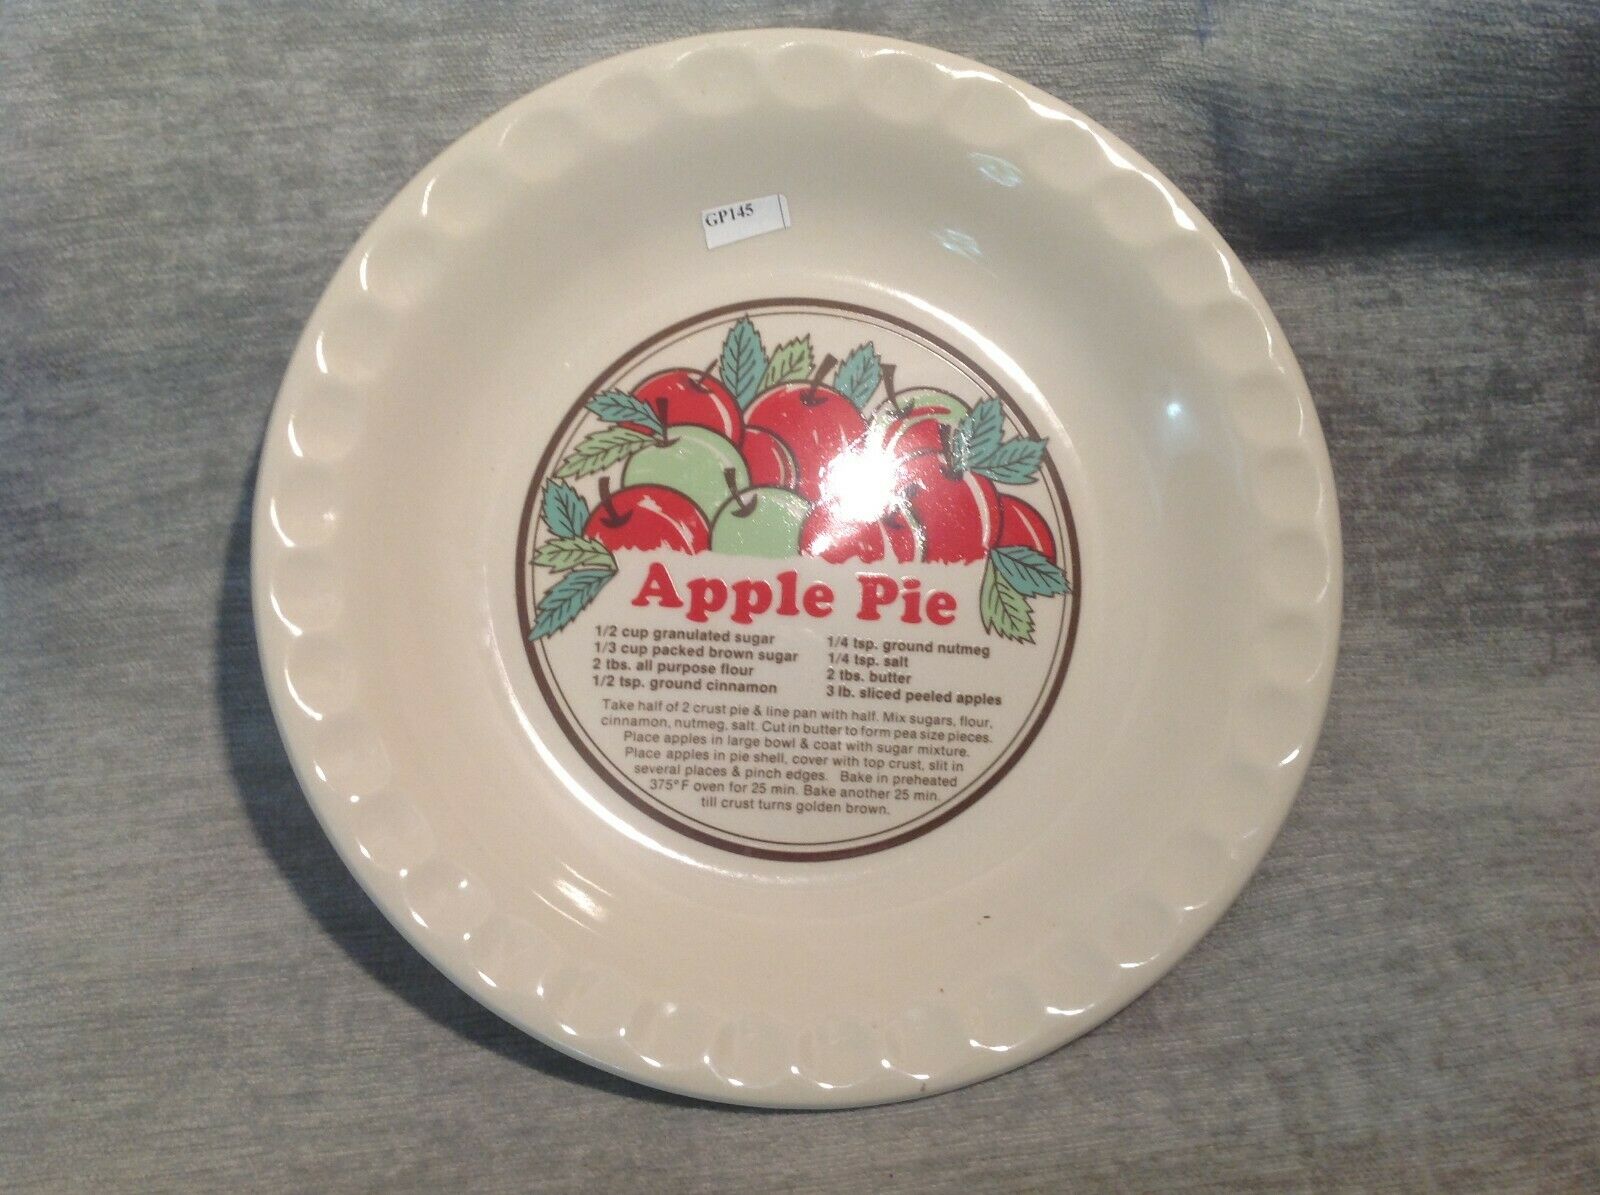 Vintage Apple Pie Plate With Recipe Printed On Back Of The Plate By Sunny Craft